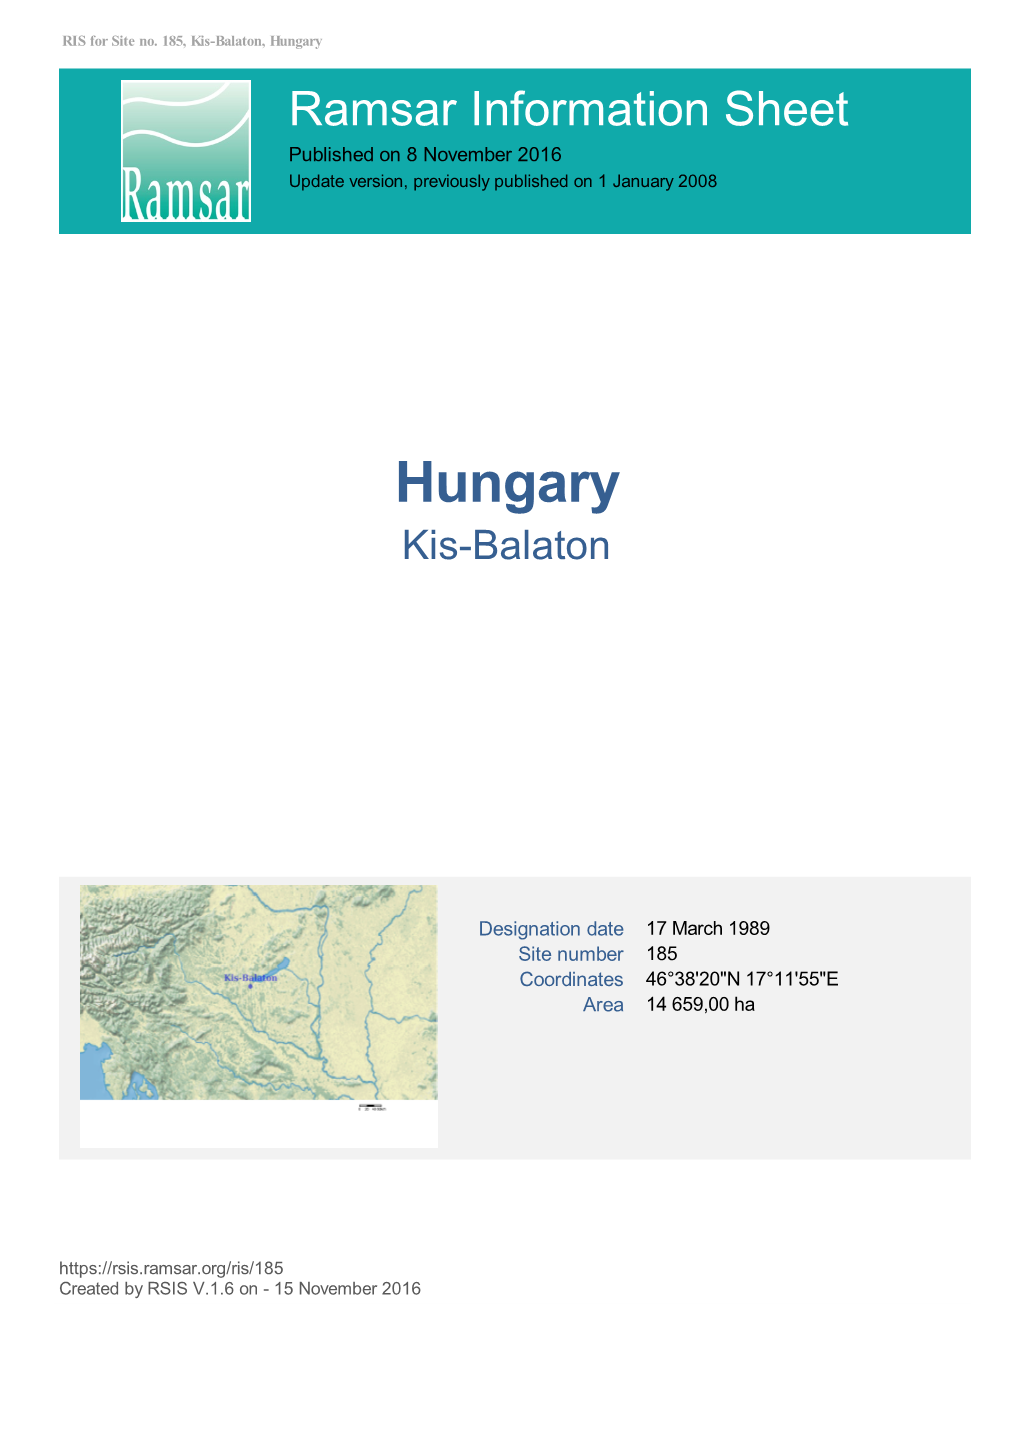 Hungary Ramsar Information Sheet Published on 8 November 2016 Update Version, Previously Published on 1 January 2008